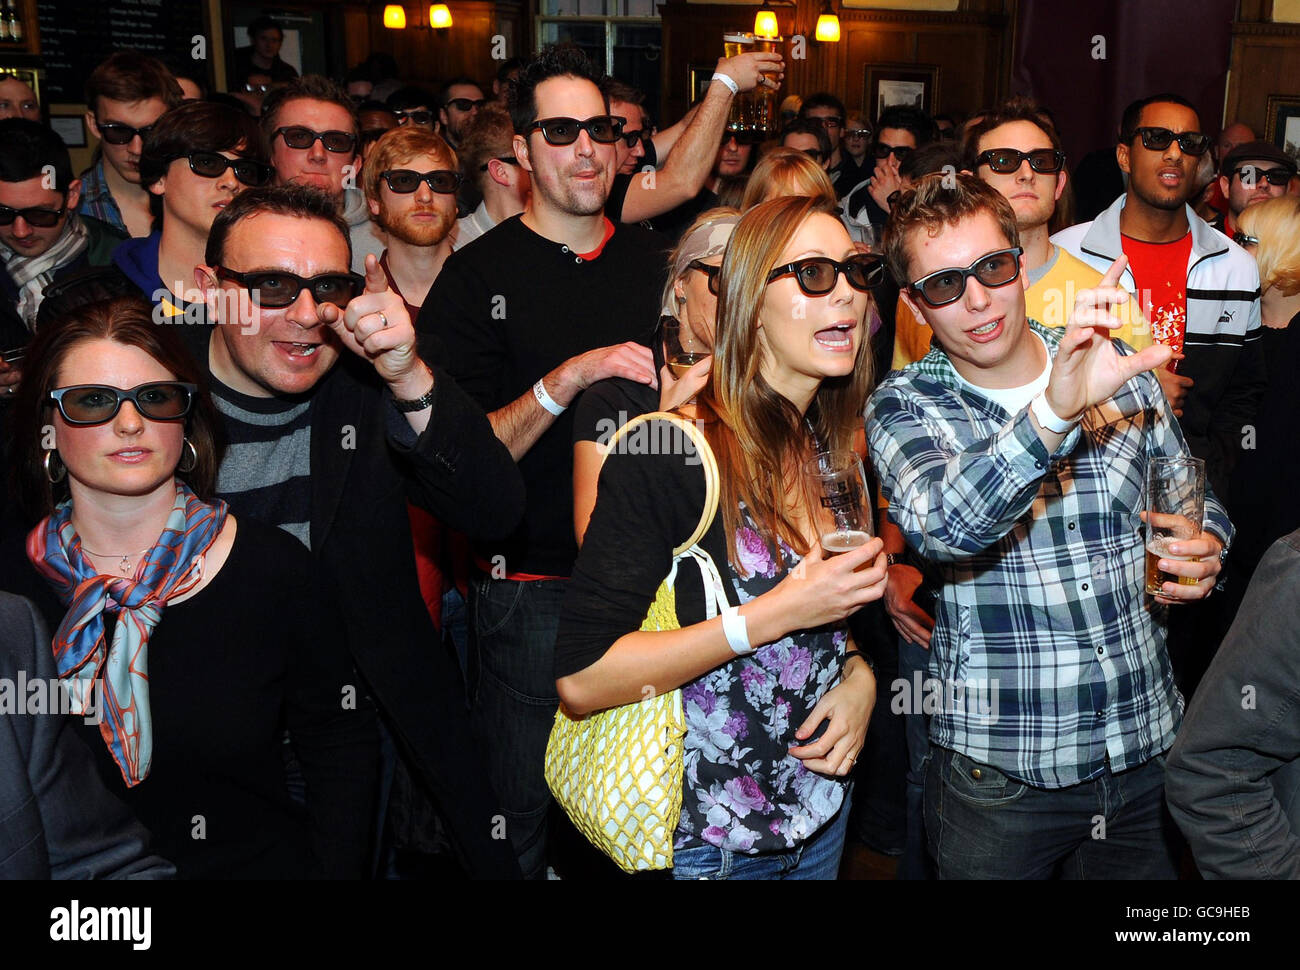 Football fans watch the world's first live 3D TV sports broadcast football match between Arsenal and Manchester Utd in the Railway Tavern in London. Stock Photo